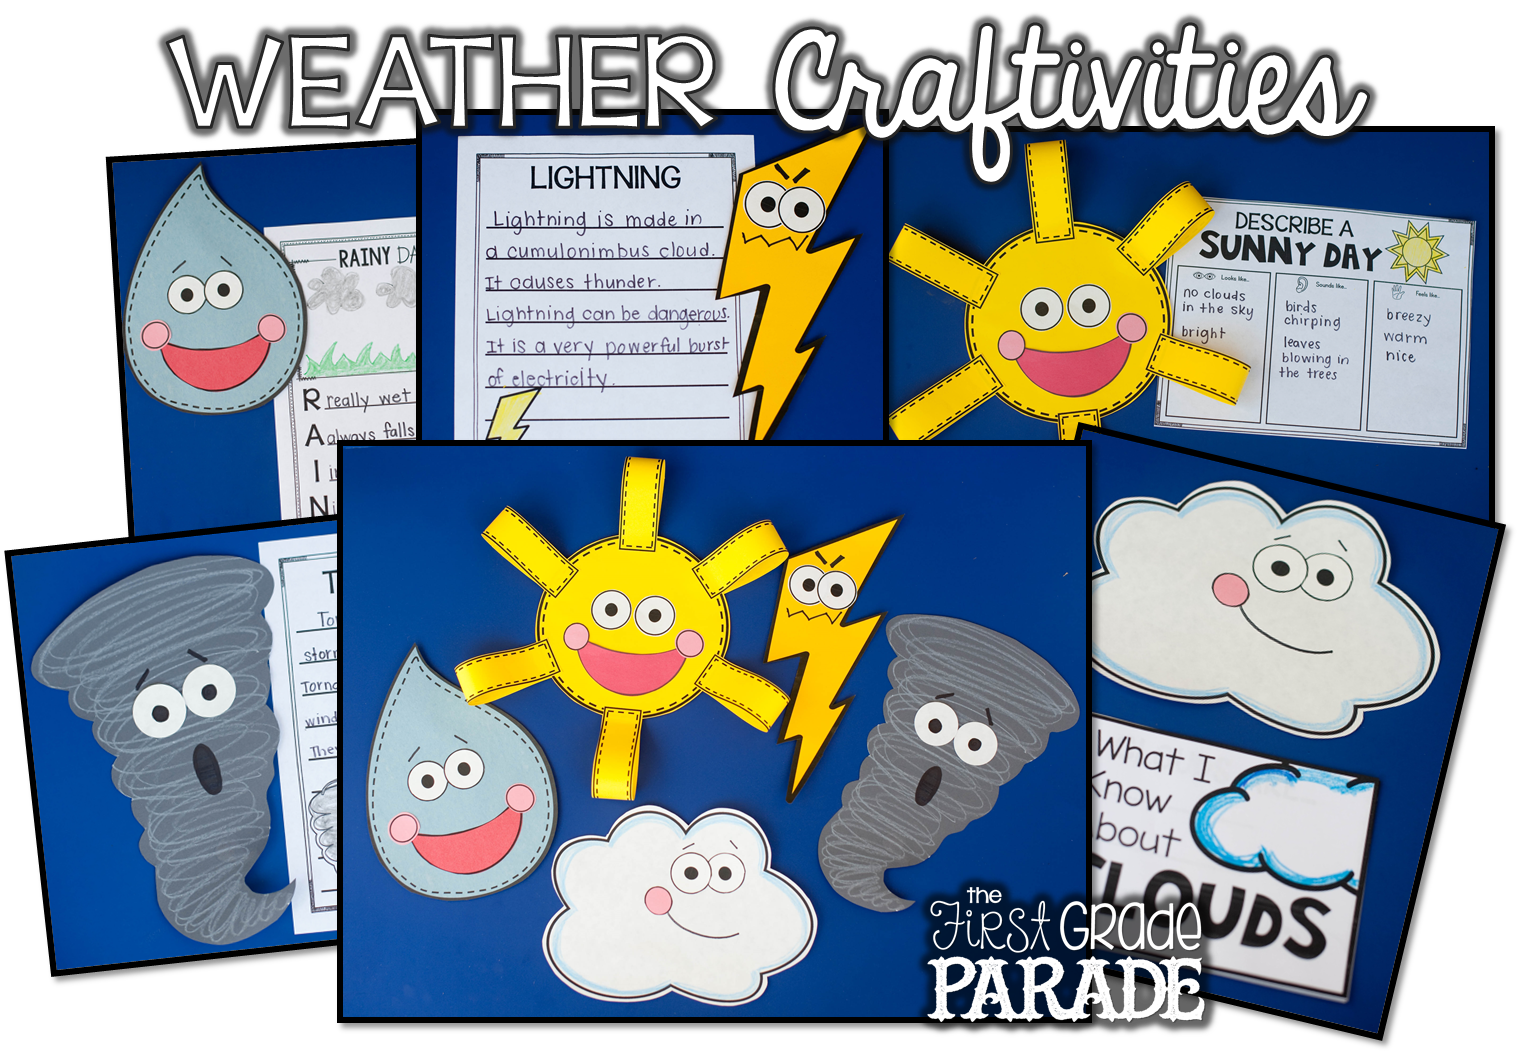 Morning clipart fine weather. All about the activities